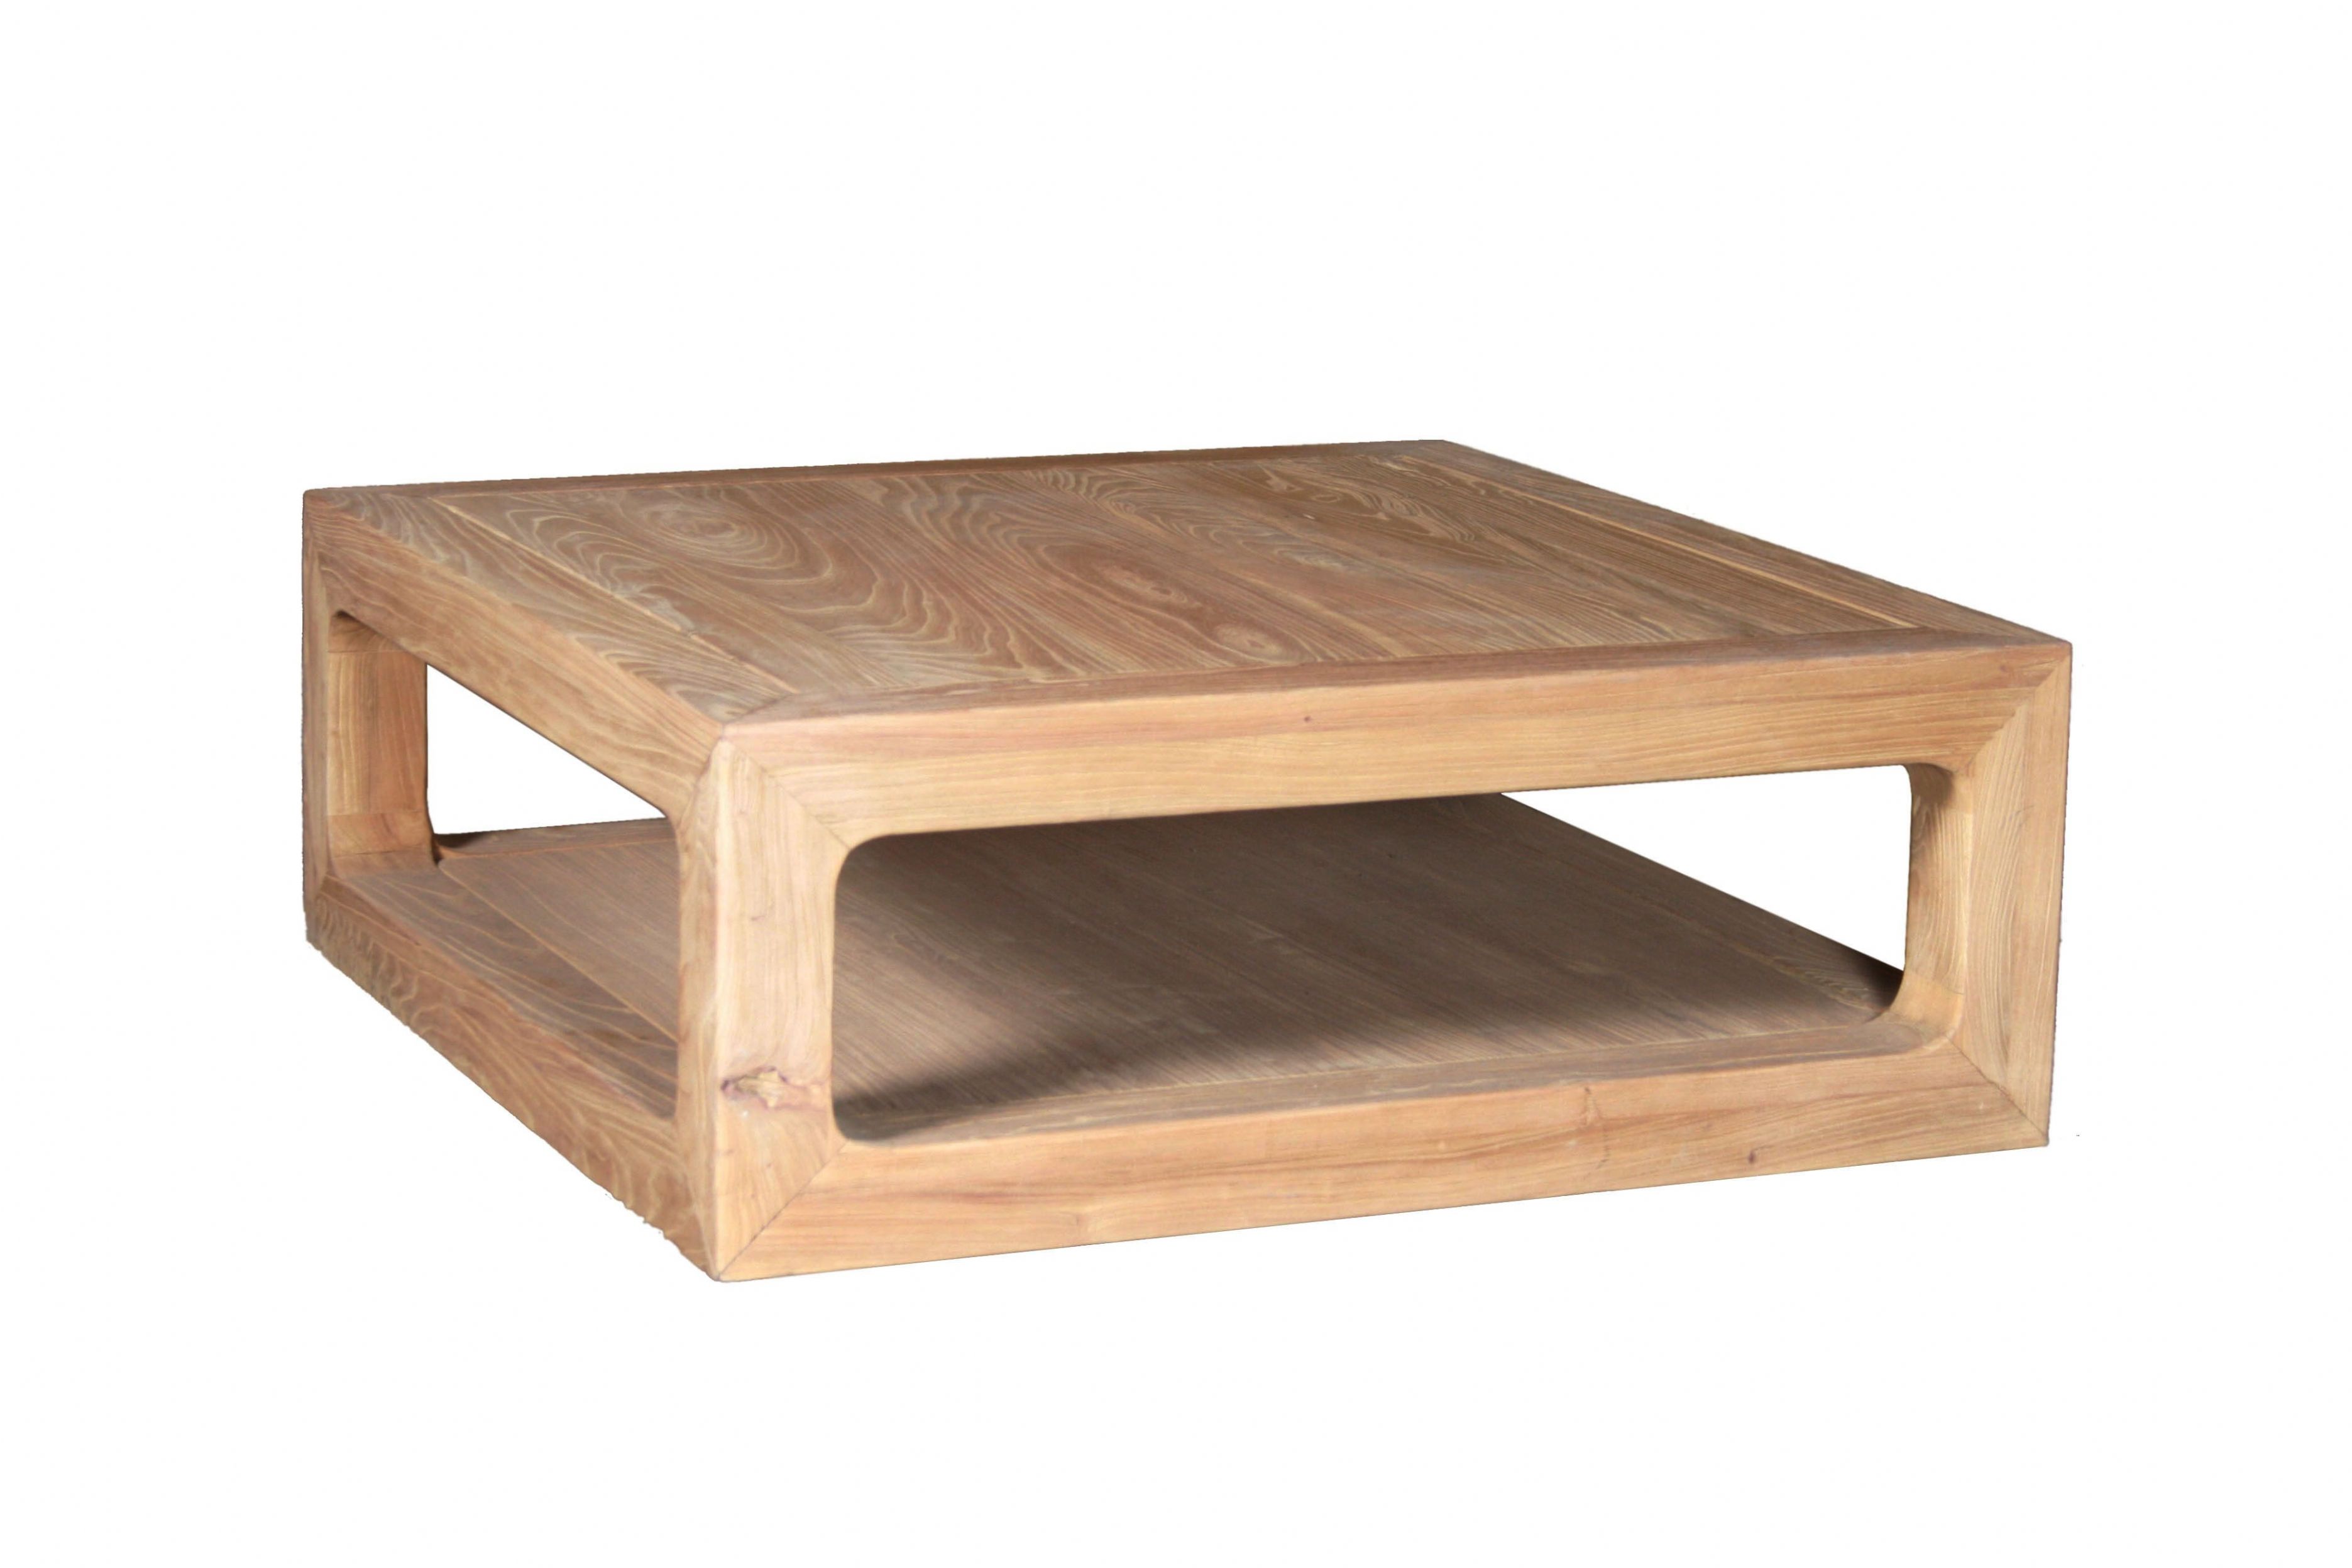 wooden coffee table design photo - 6